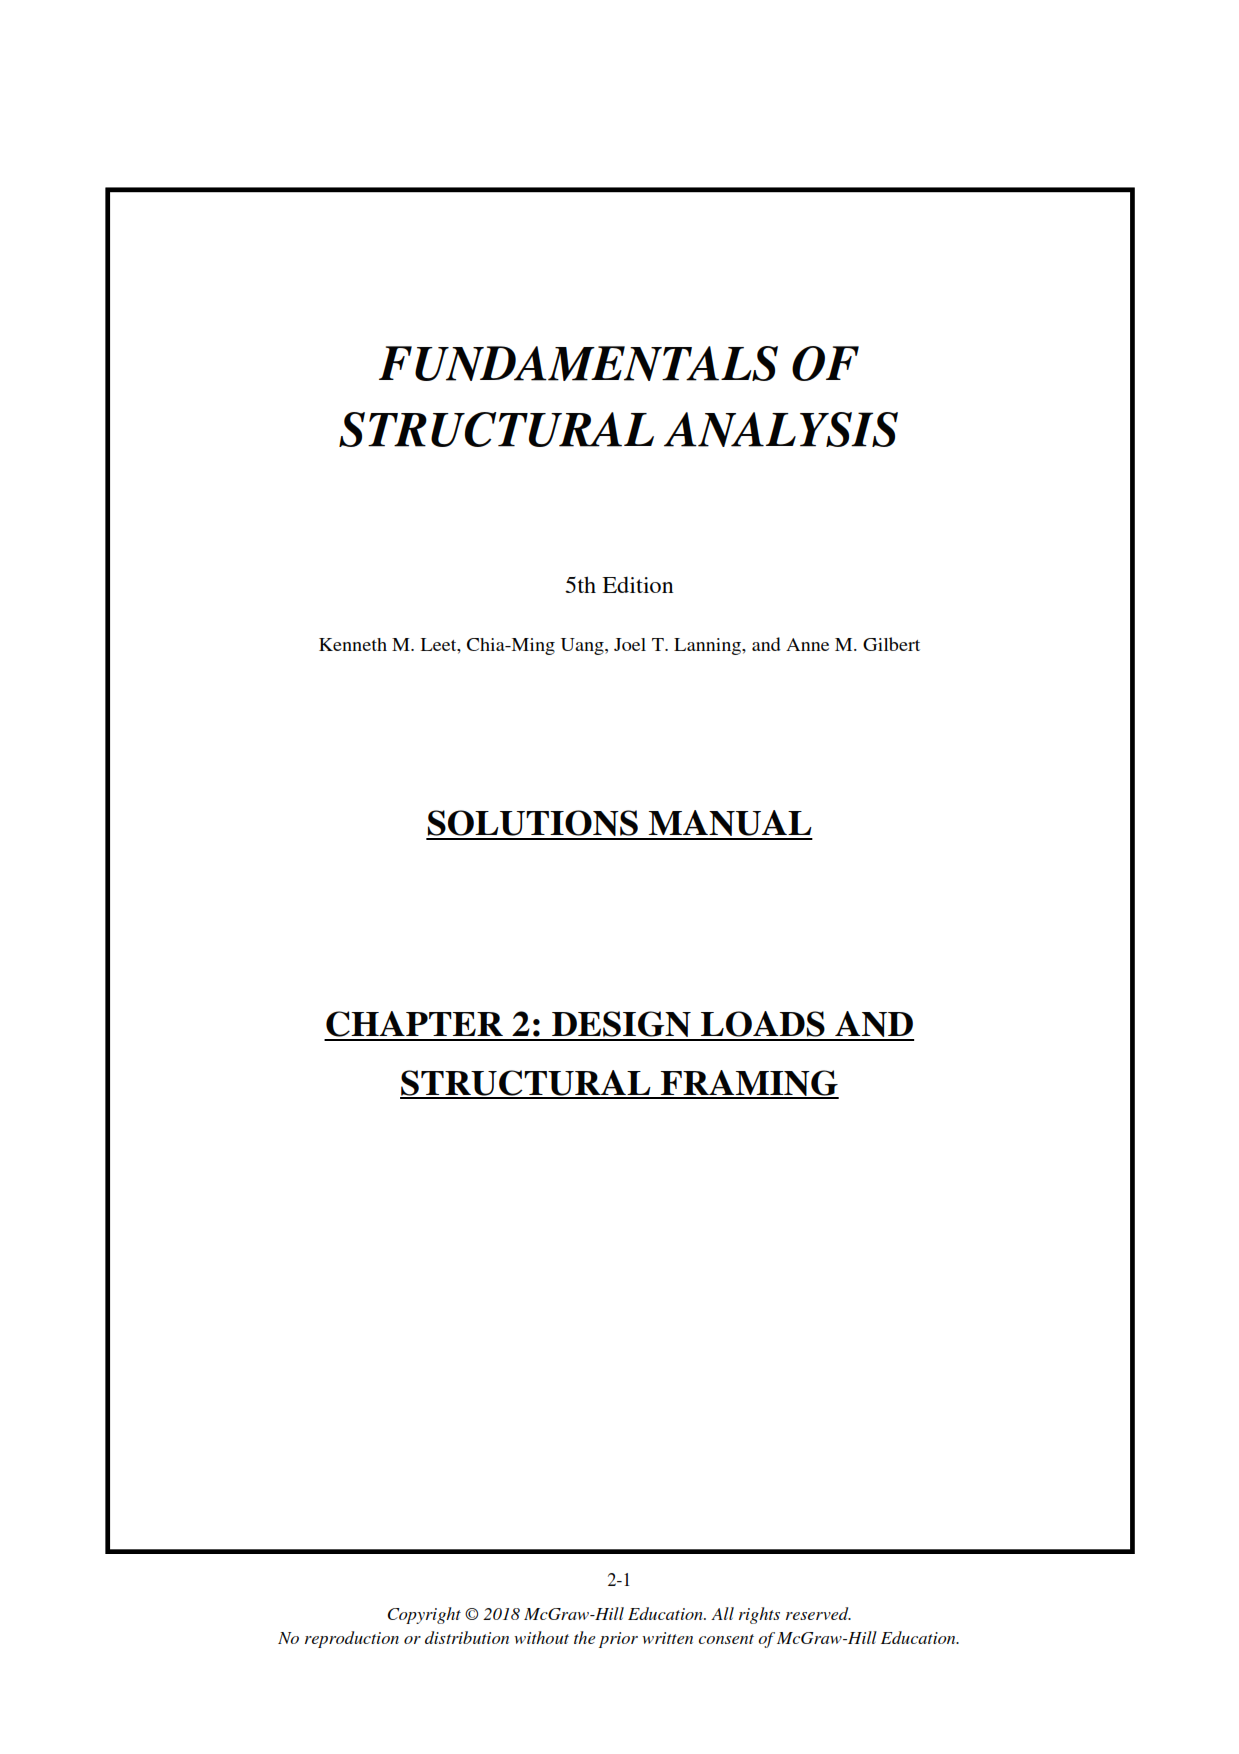 Download free fundamentals of structural analysis 5th edition Leet & Uang solution manual pdf | answer key & solutions